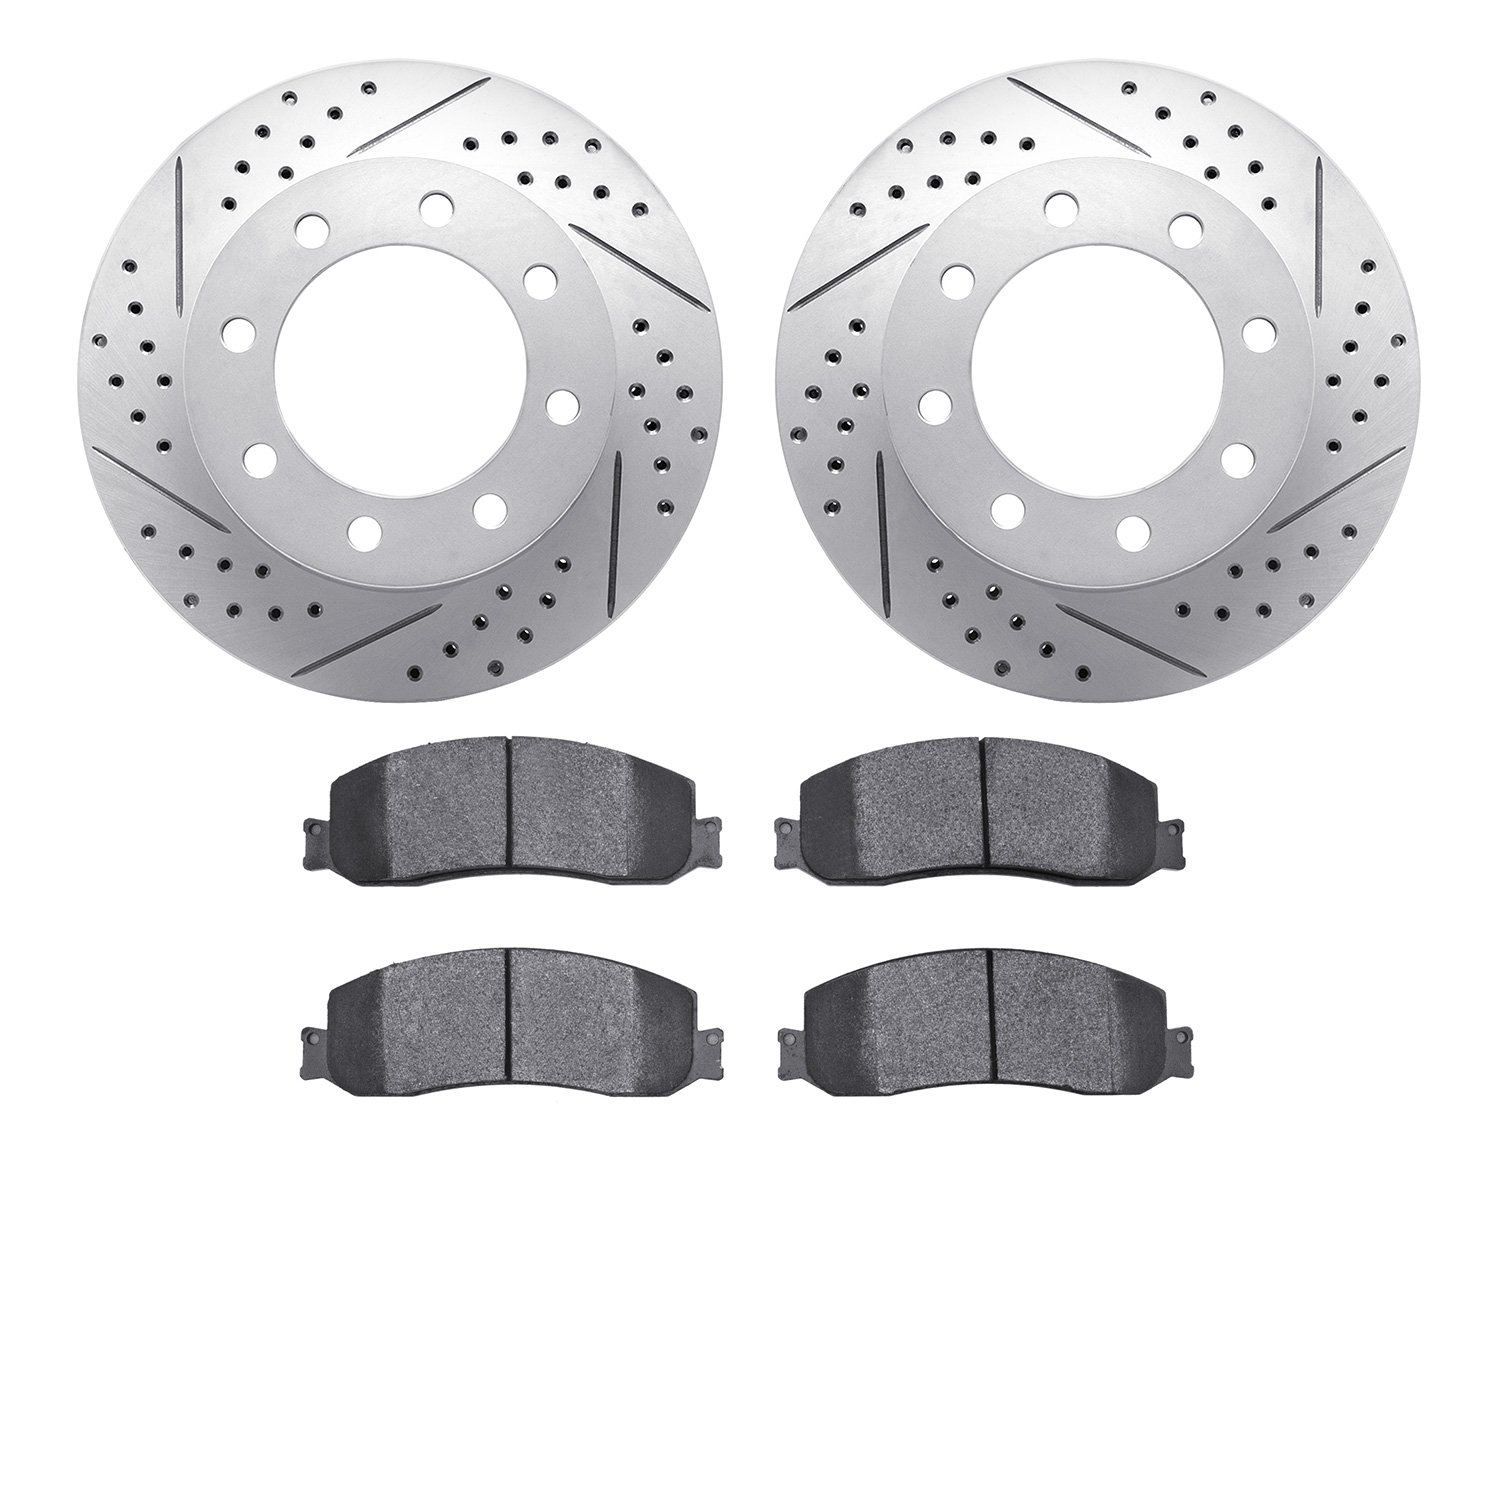 2502-54177 Geoperformance Drilled/Slotted Rotors w/5000 Advanced Brake Pads Kit, 2010-2012 Ford/Lincoln/Mercury/Mazda, Position: